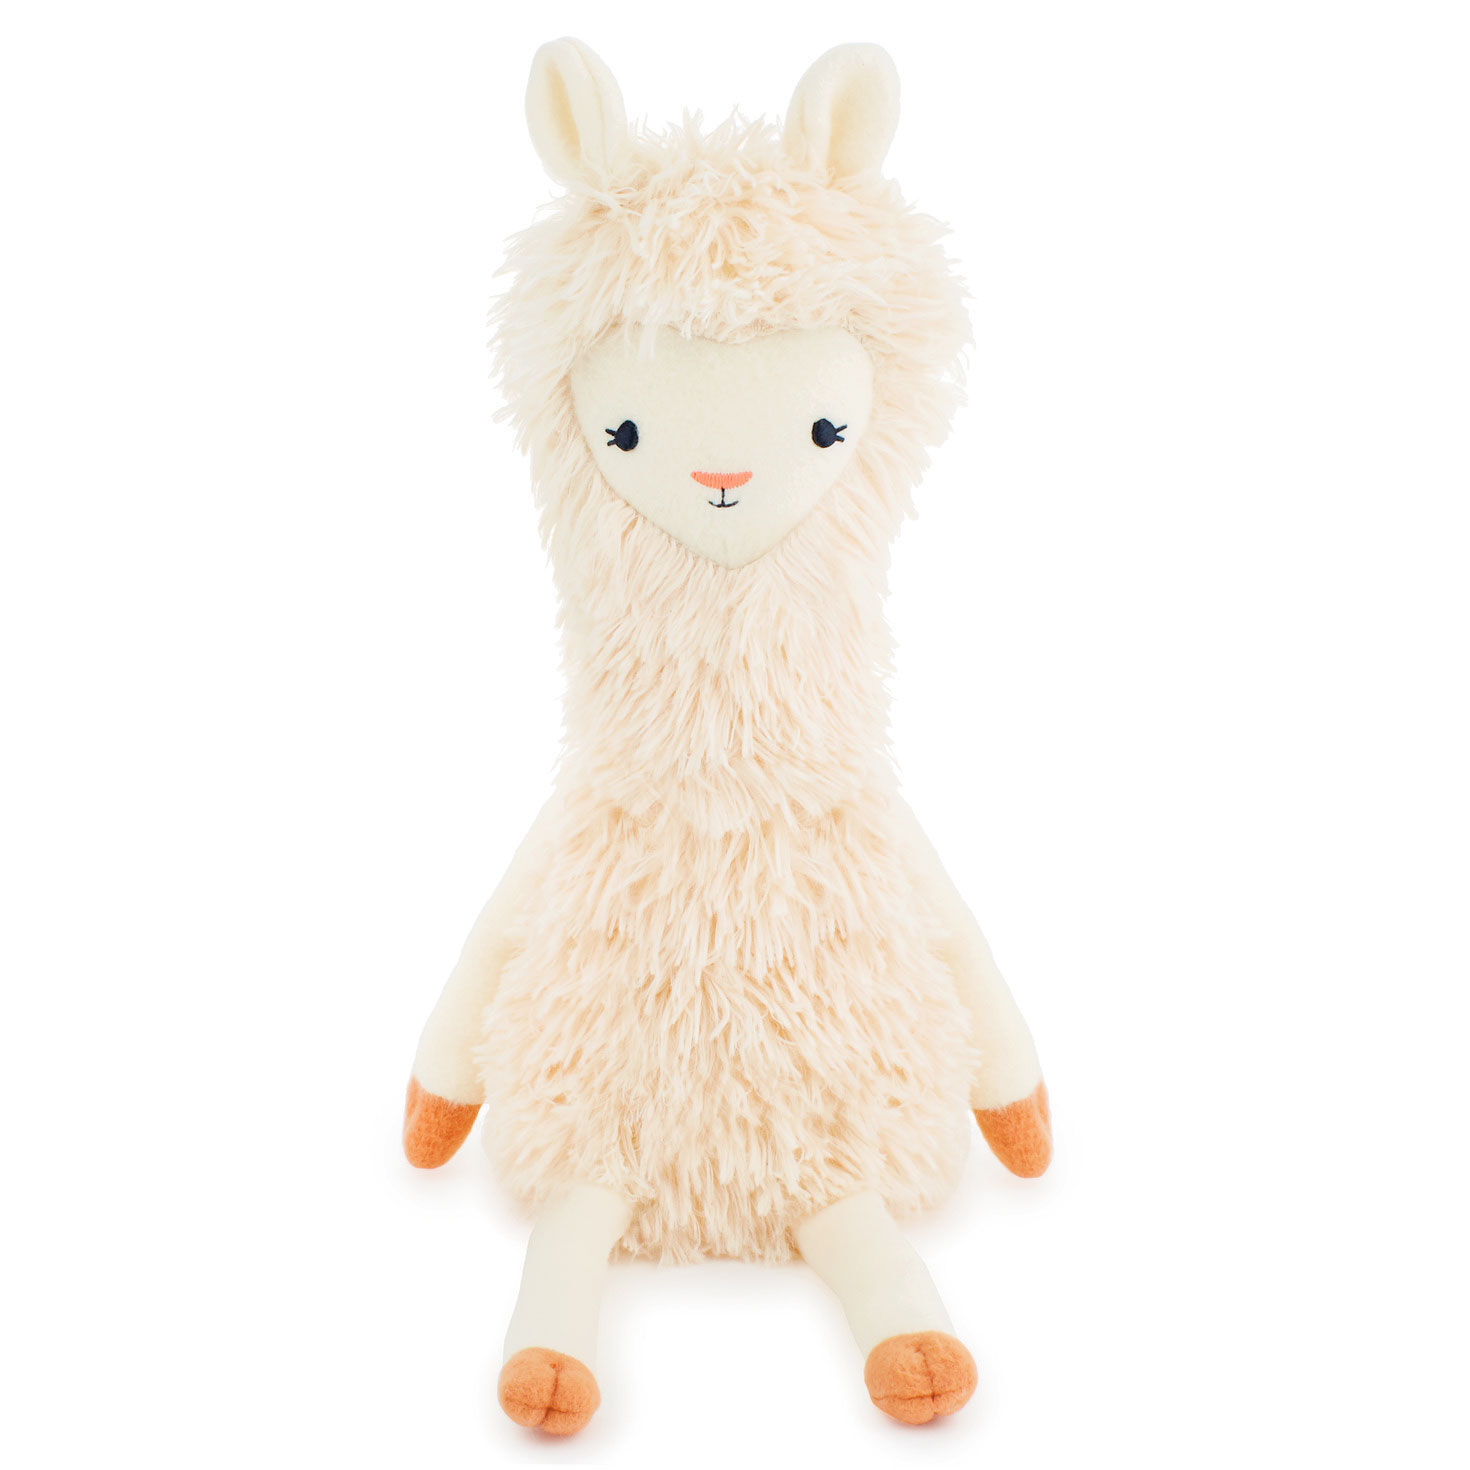 MopTops Llama Stuffed Animal With You Make Me Smile Board Book for only USD 34.99 | Hallmark